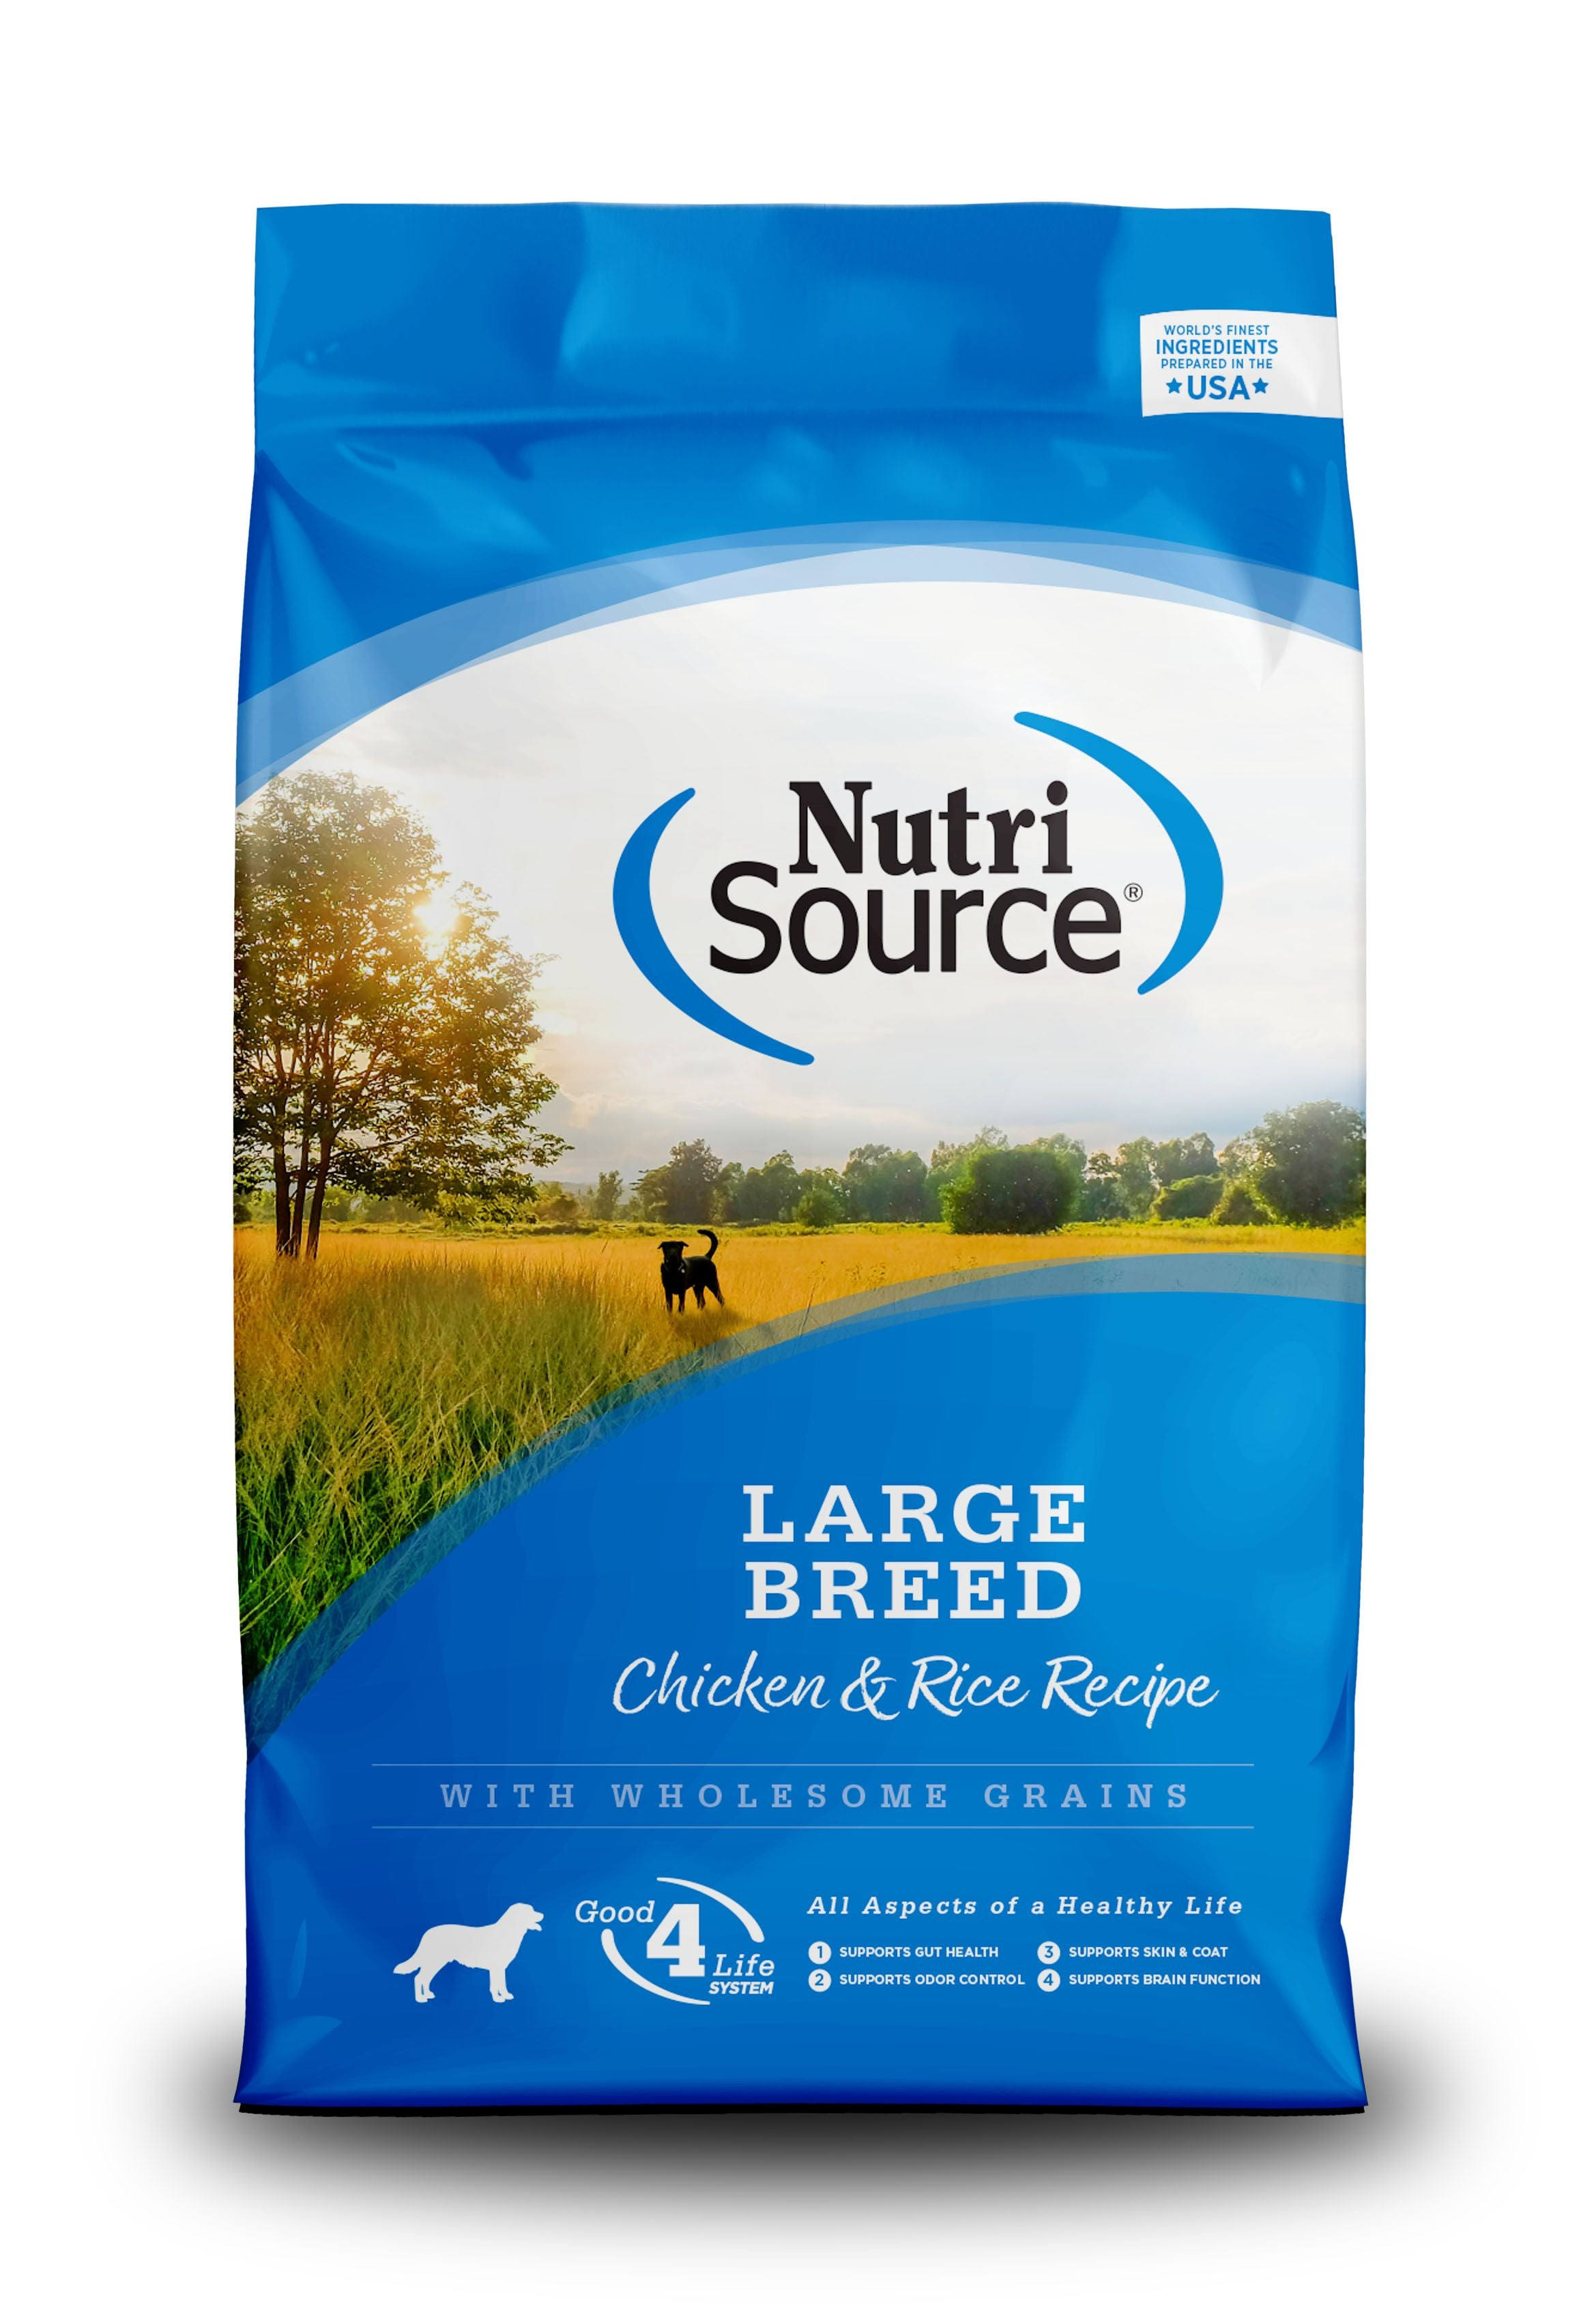 Nutrisource Chicken & Rice Large Breed Dry Dog Food 30 LB